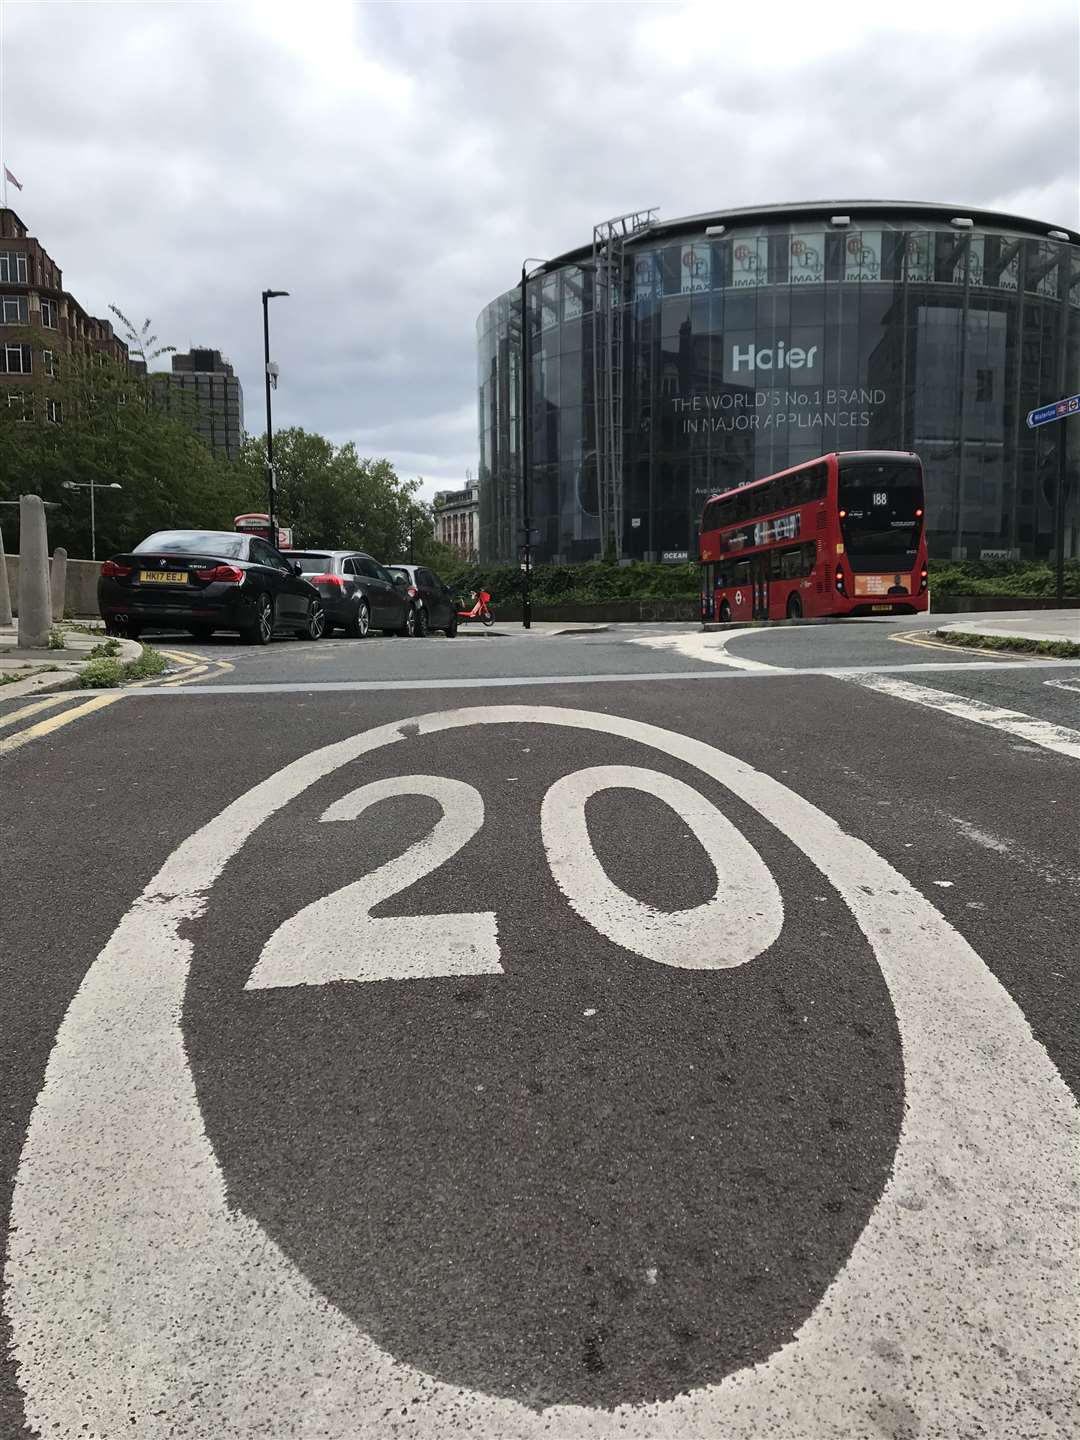 20mph limits are popping up all over - why not in St James?